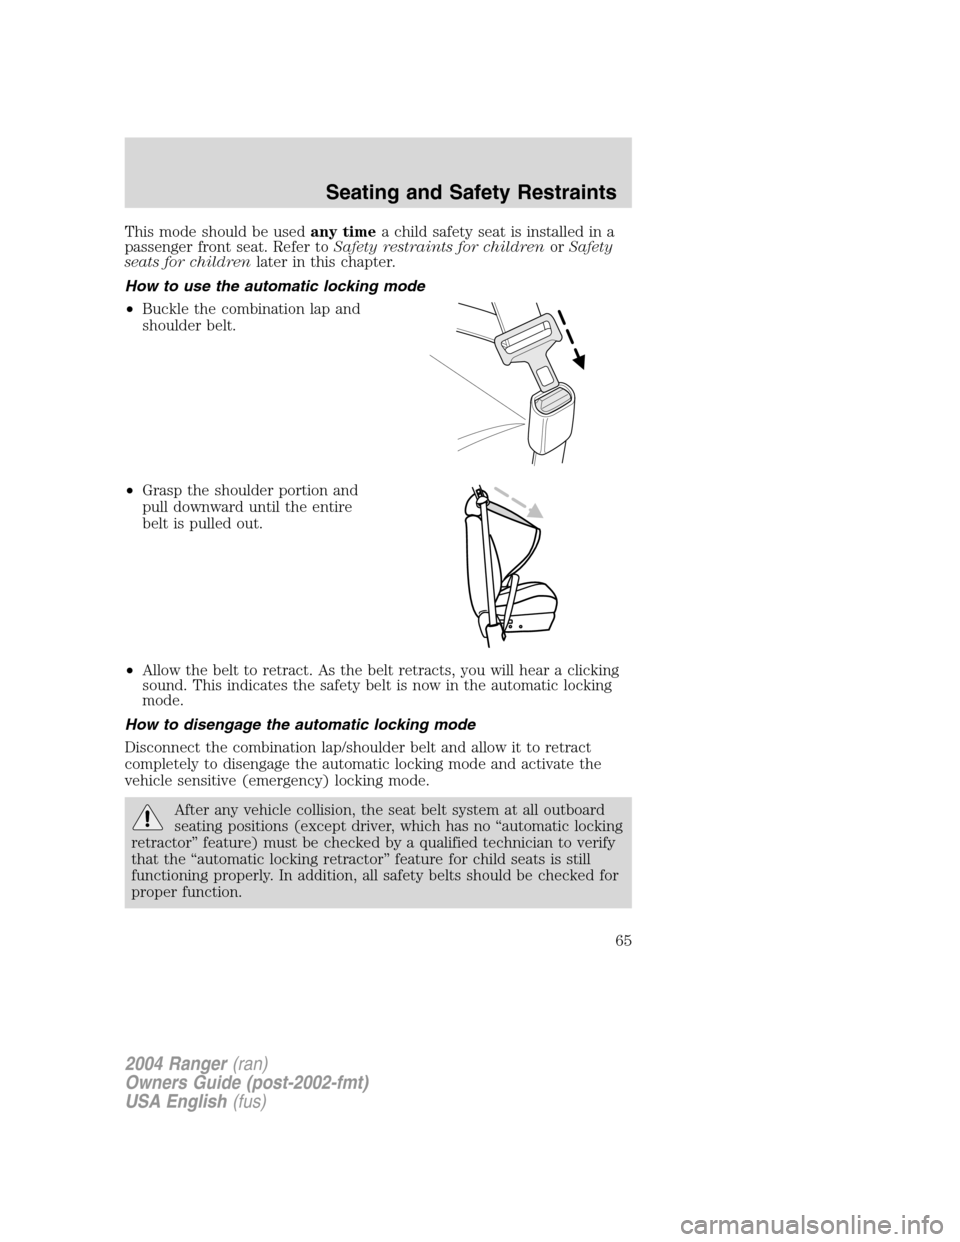 FORD RANGER 2004 2.G Owners Manual This mode should be usedany timea child safety seat is installed in a
passenger front seat. Refer to Safety restraints for children orSafety
seats for children later in this chapter.
How to use the au